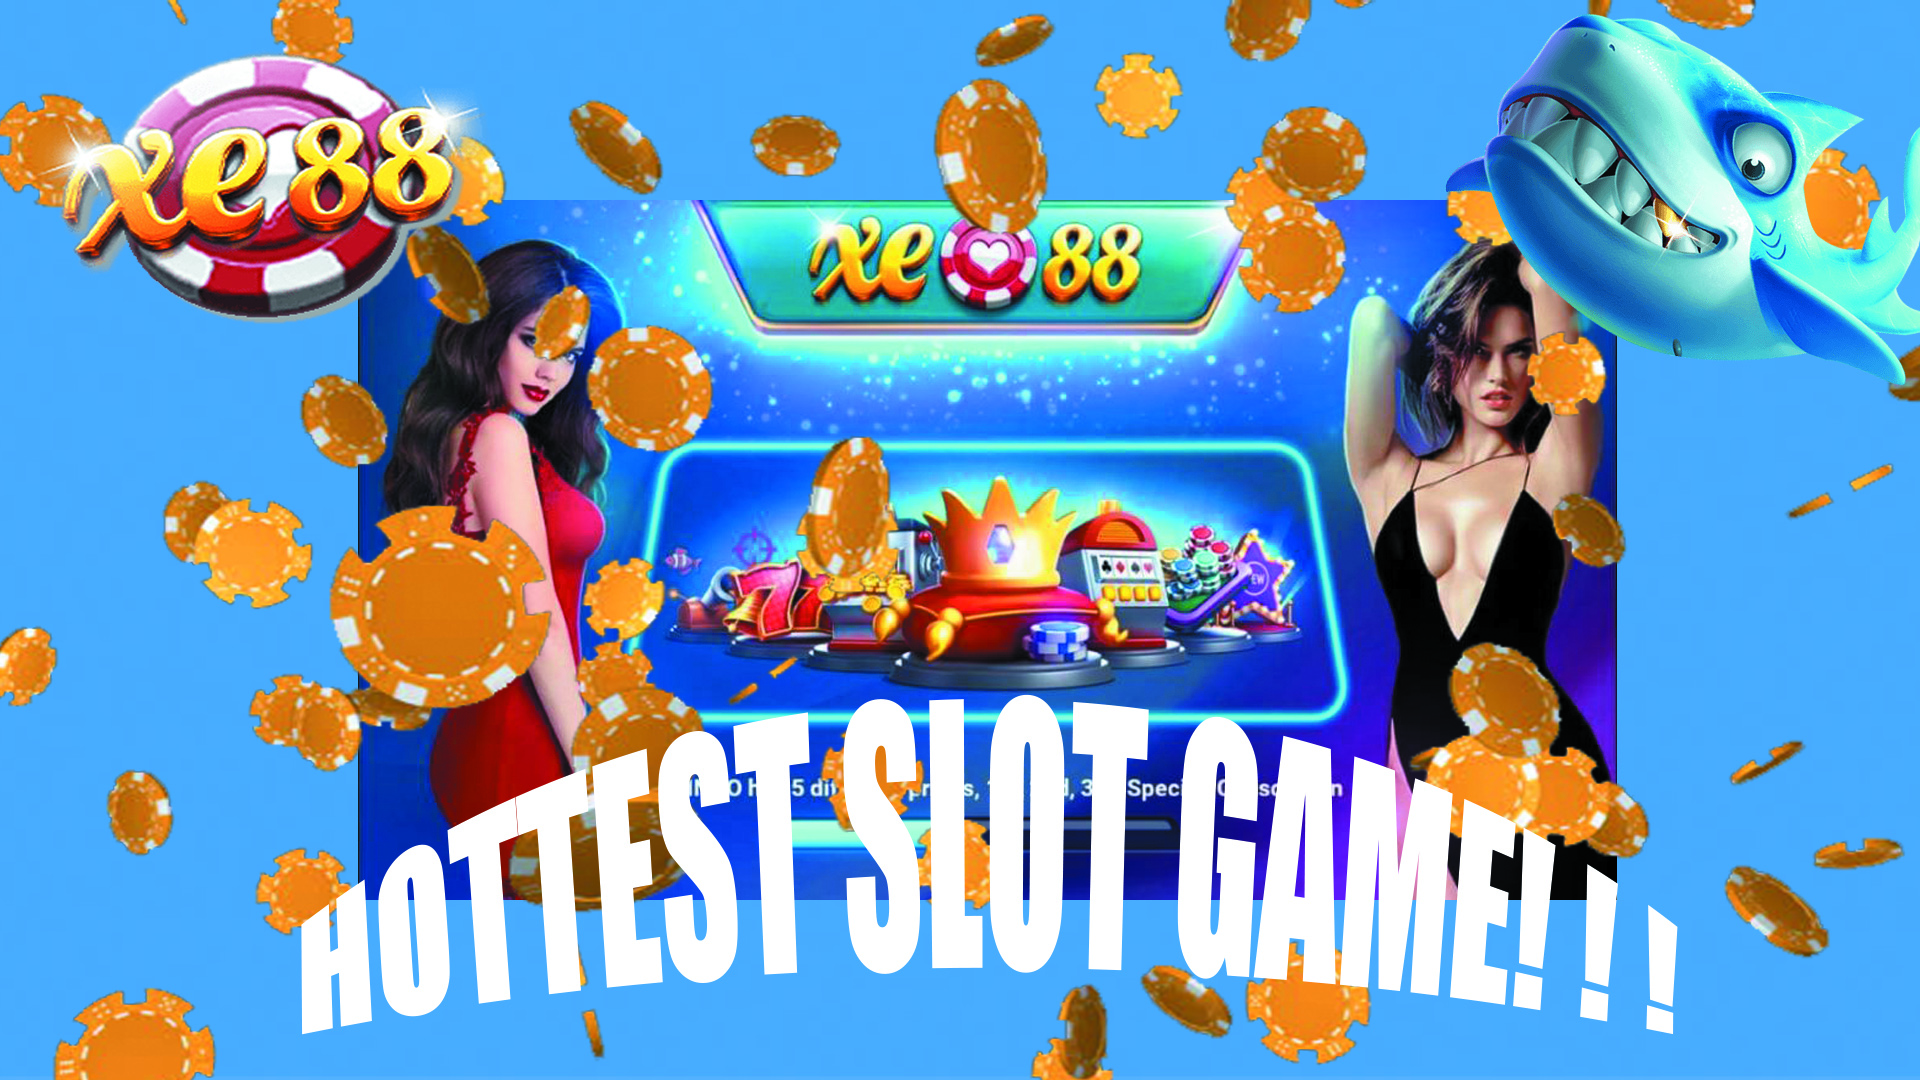 xe88 hottest casino game